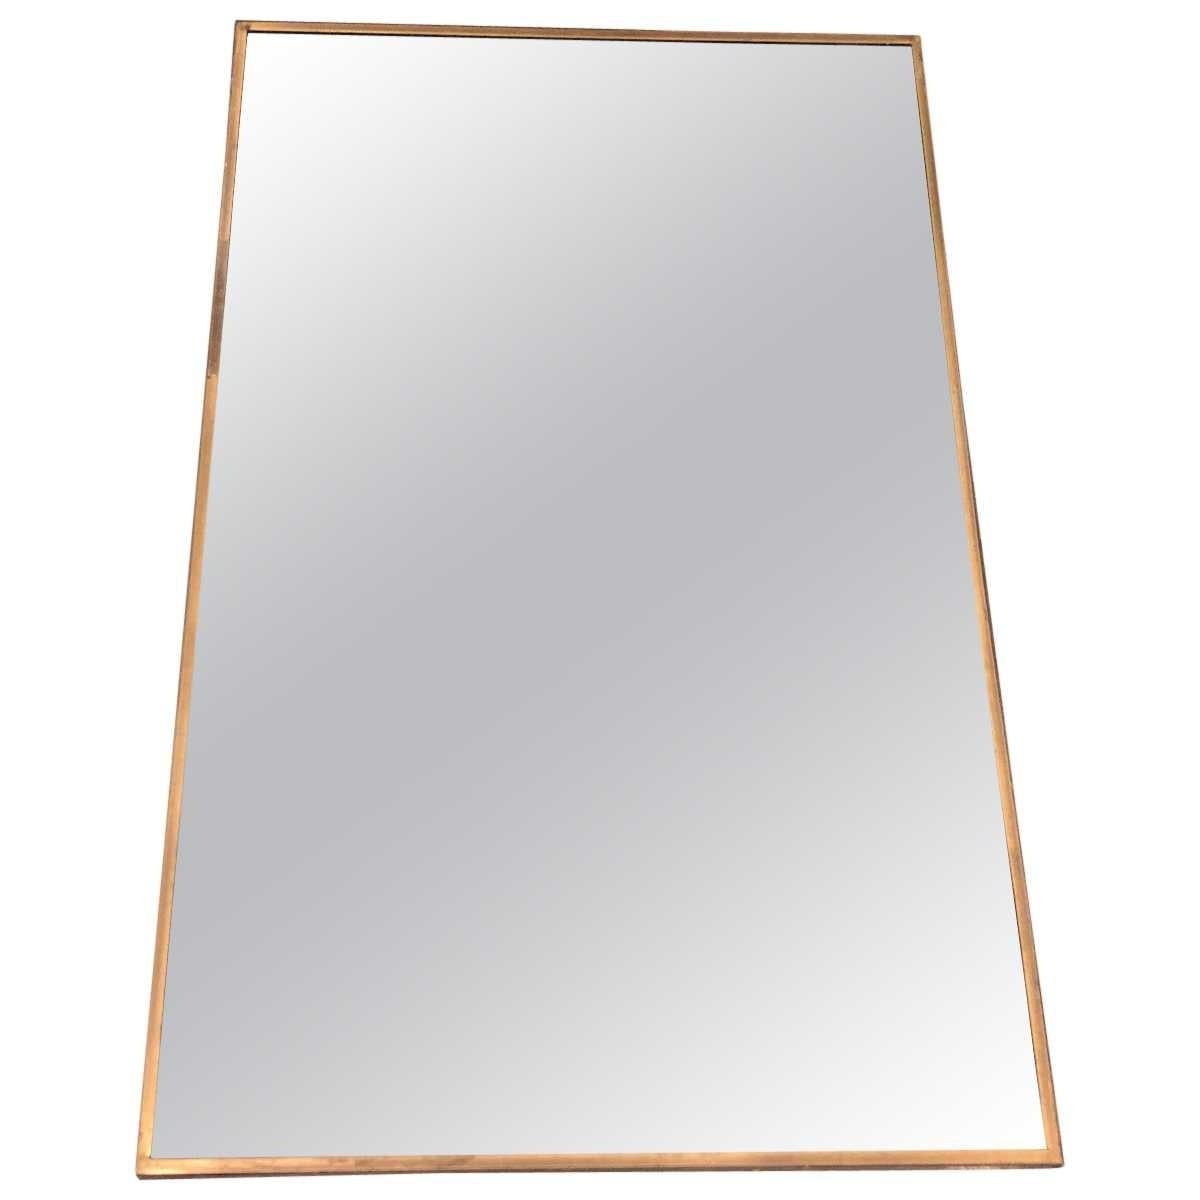 Mirror.
Antiqued brass X-form base.

Materials: Antiqued brass, mirrored glass
Dimensions
Width 19